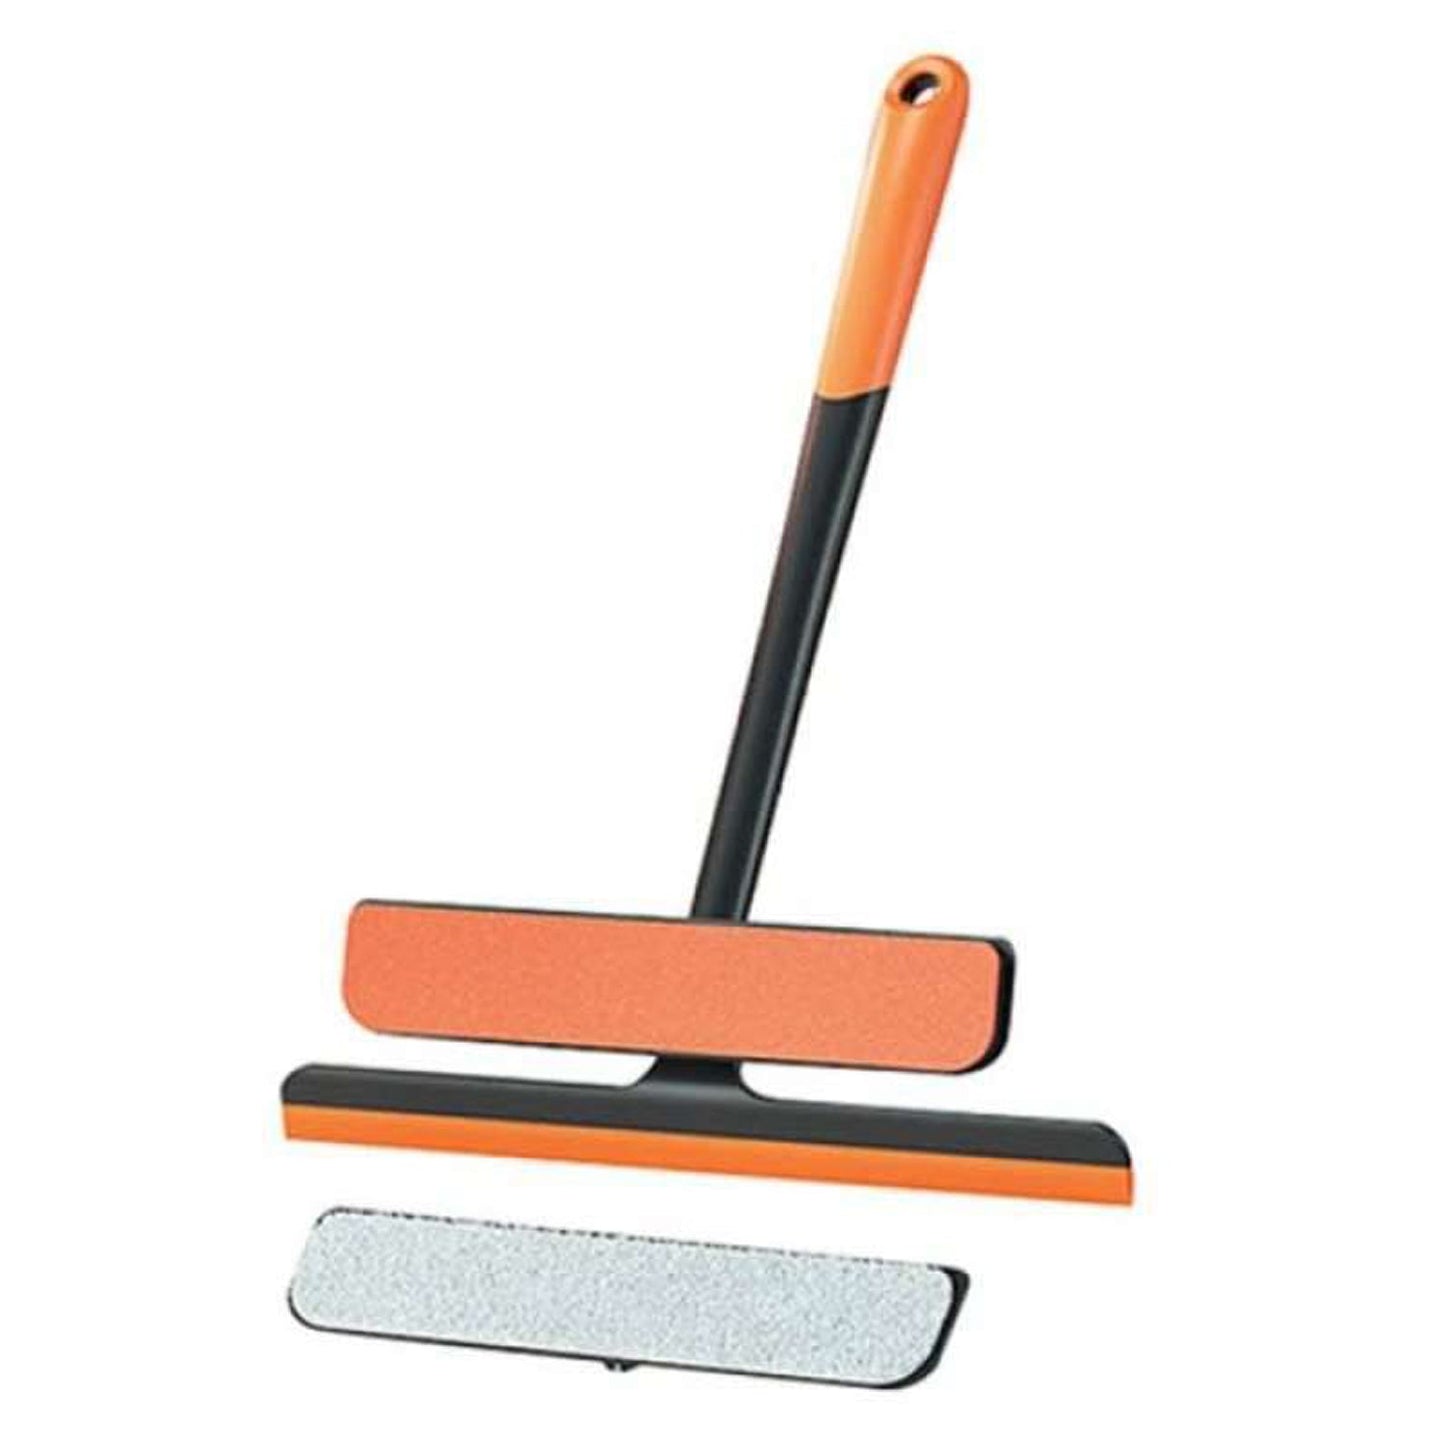 6087 3 in 1 Glass Wiper used in all kinds of household and official places for cleaning and wiping of floors, glasses and dust etc. DeoDap